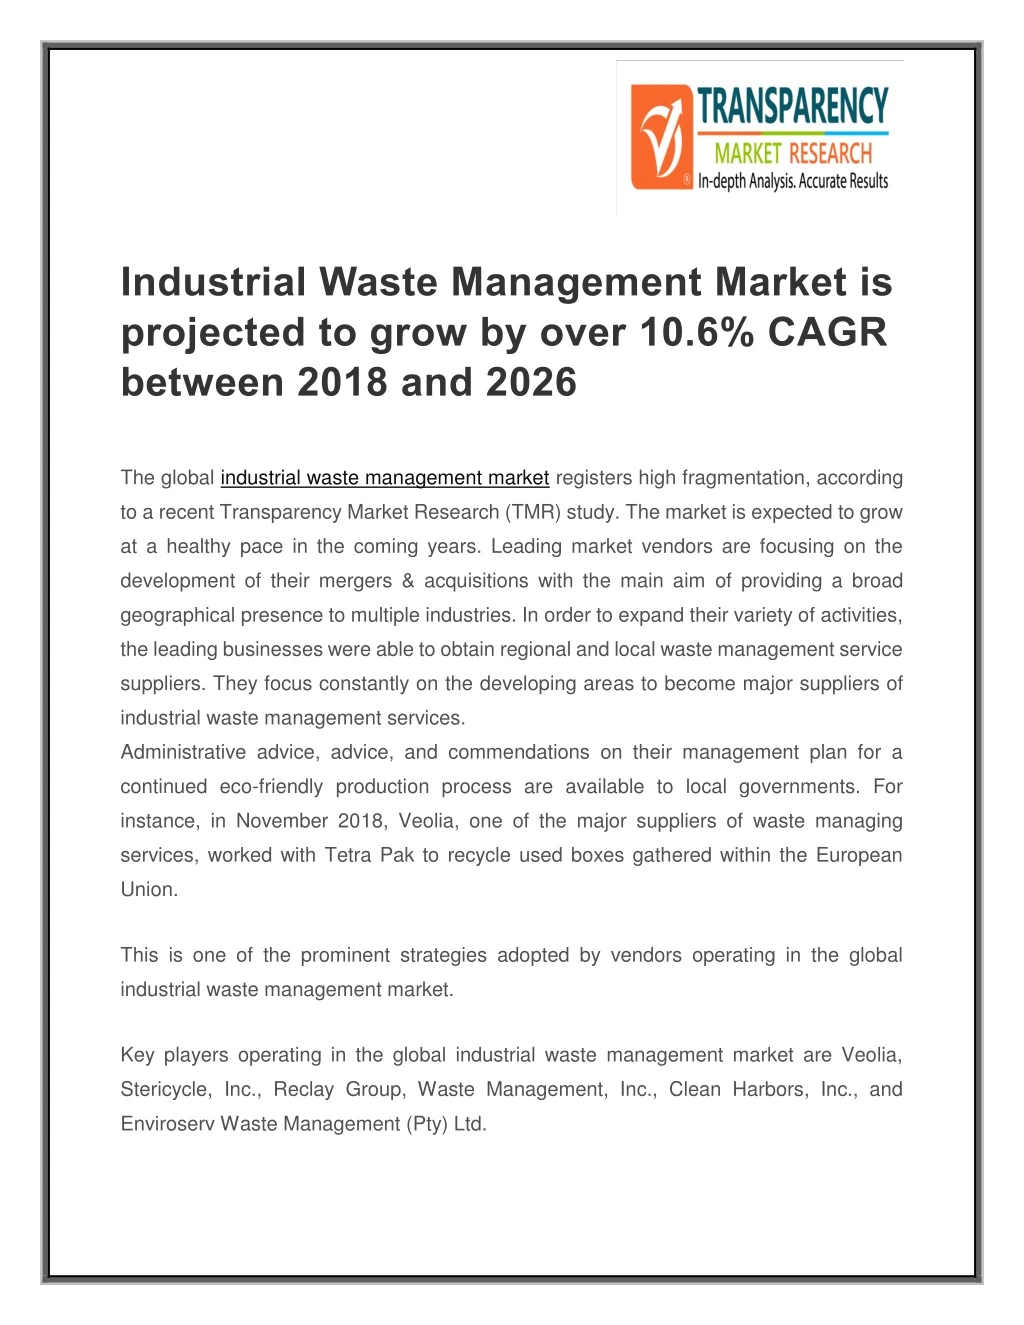 industrial waste management market is projected